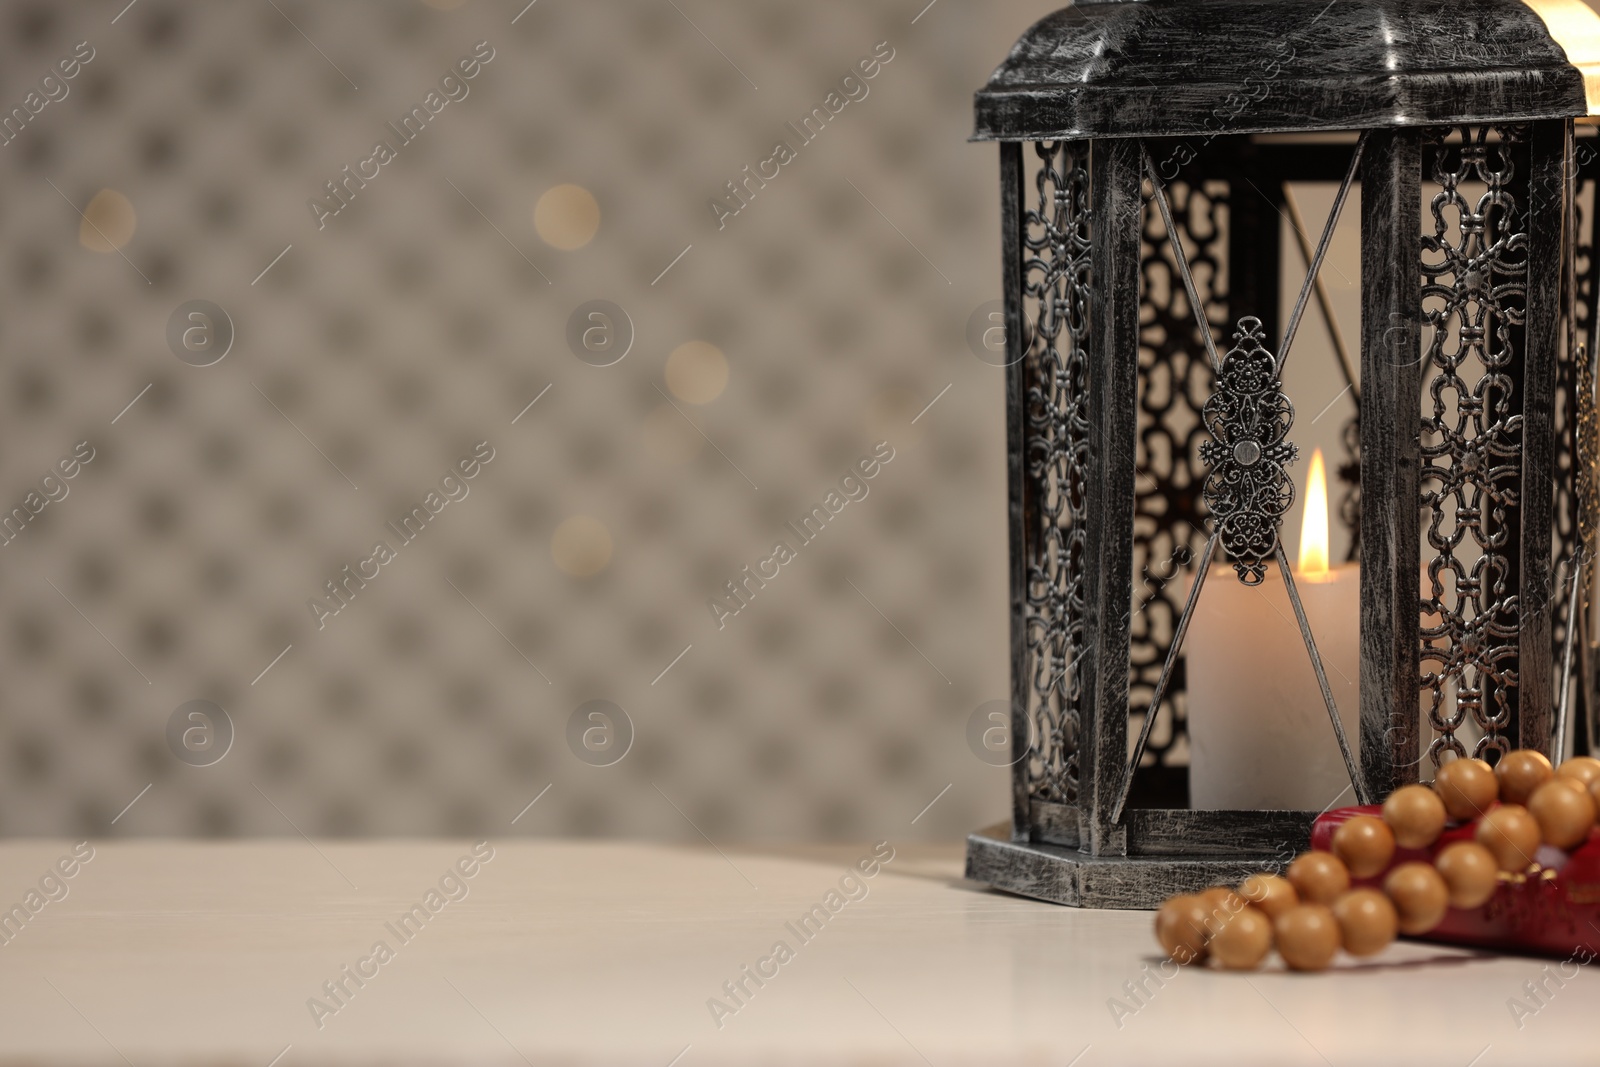 Photo of Arabic lantern, Quran and misbaha on white table. Space for text